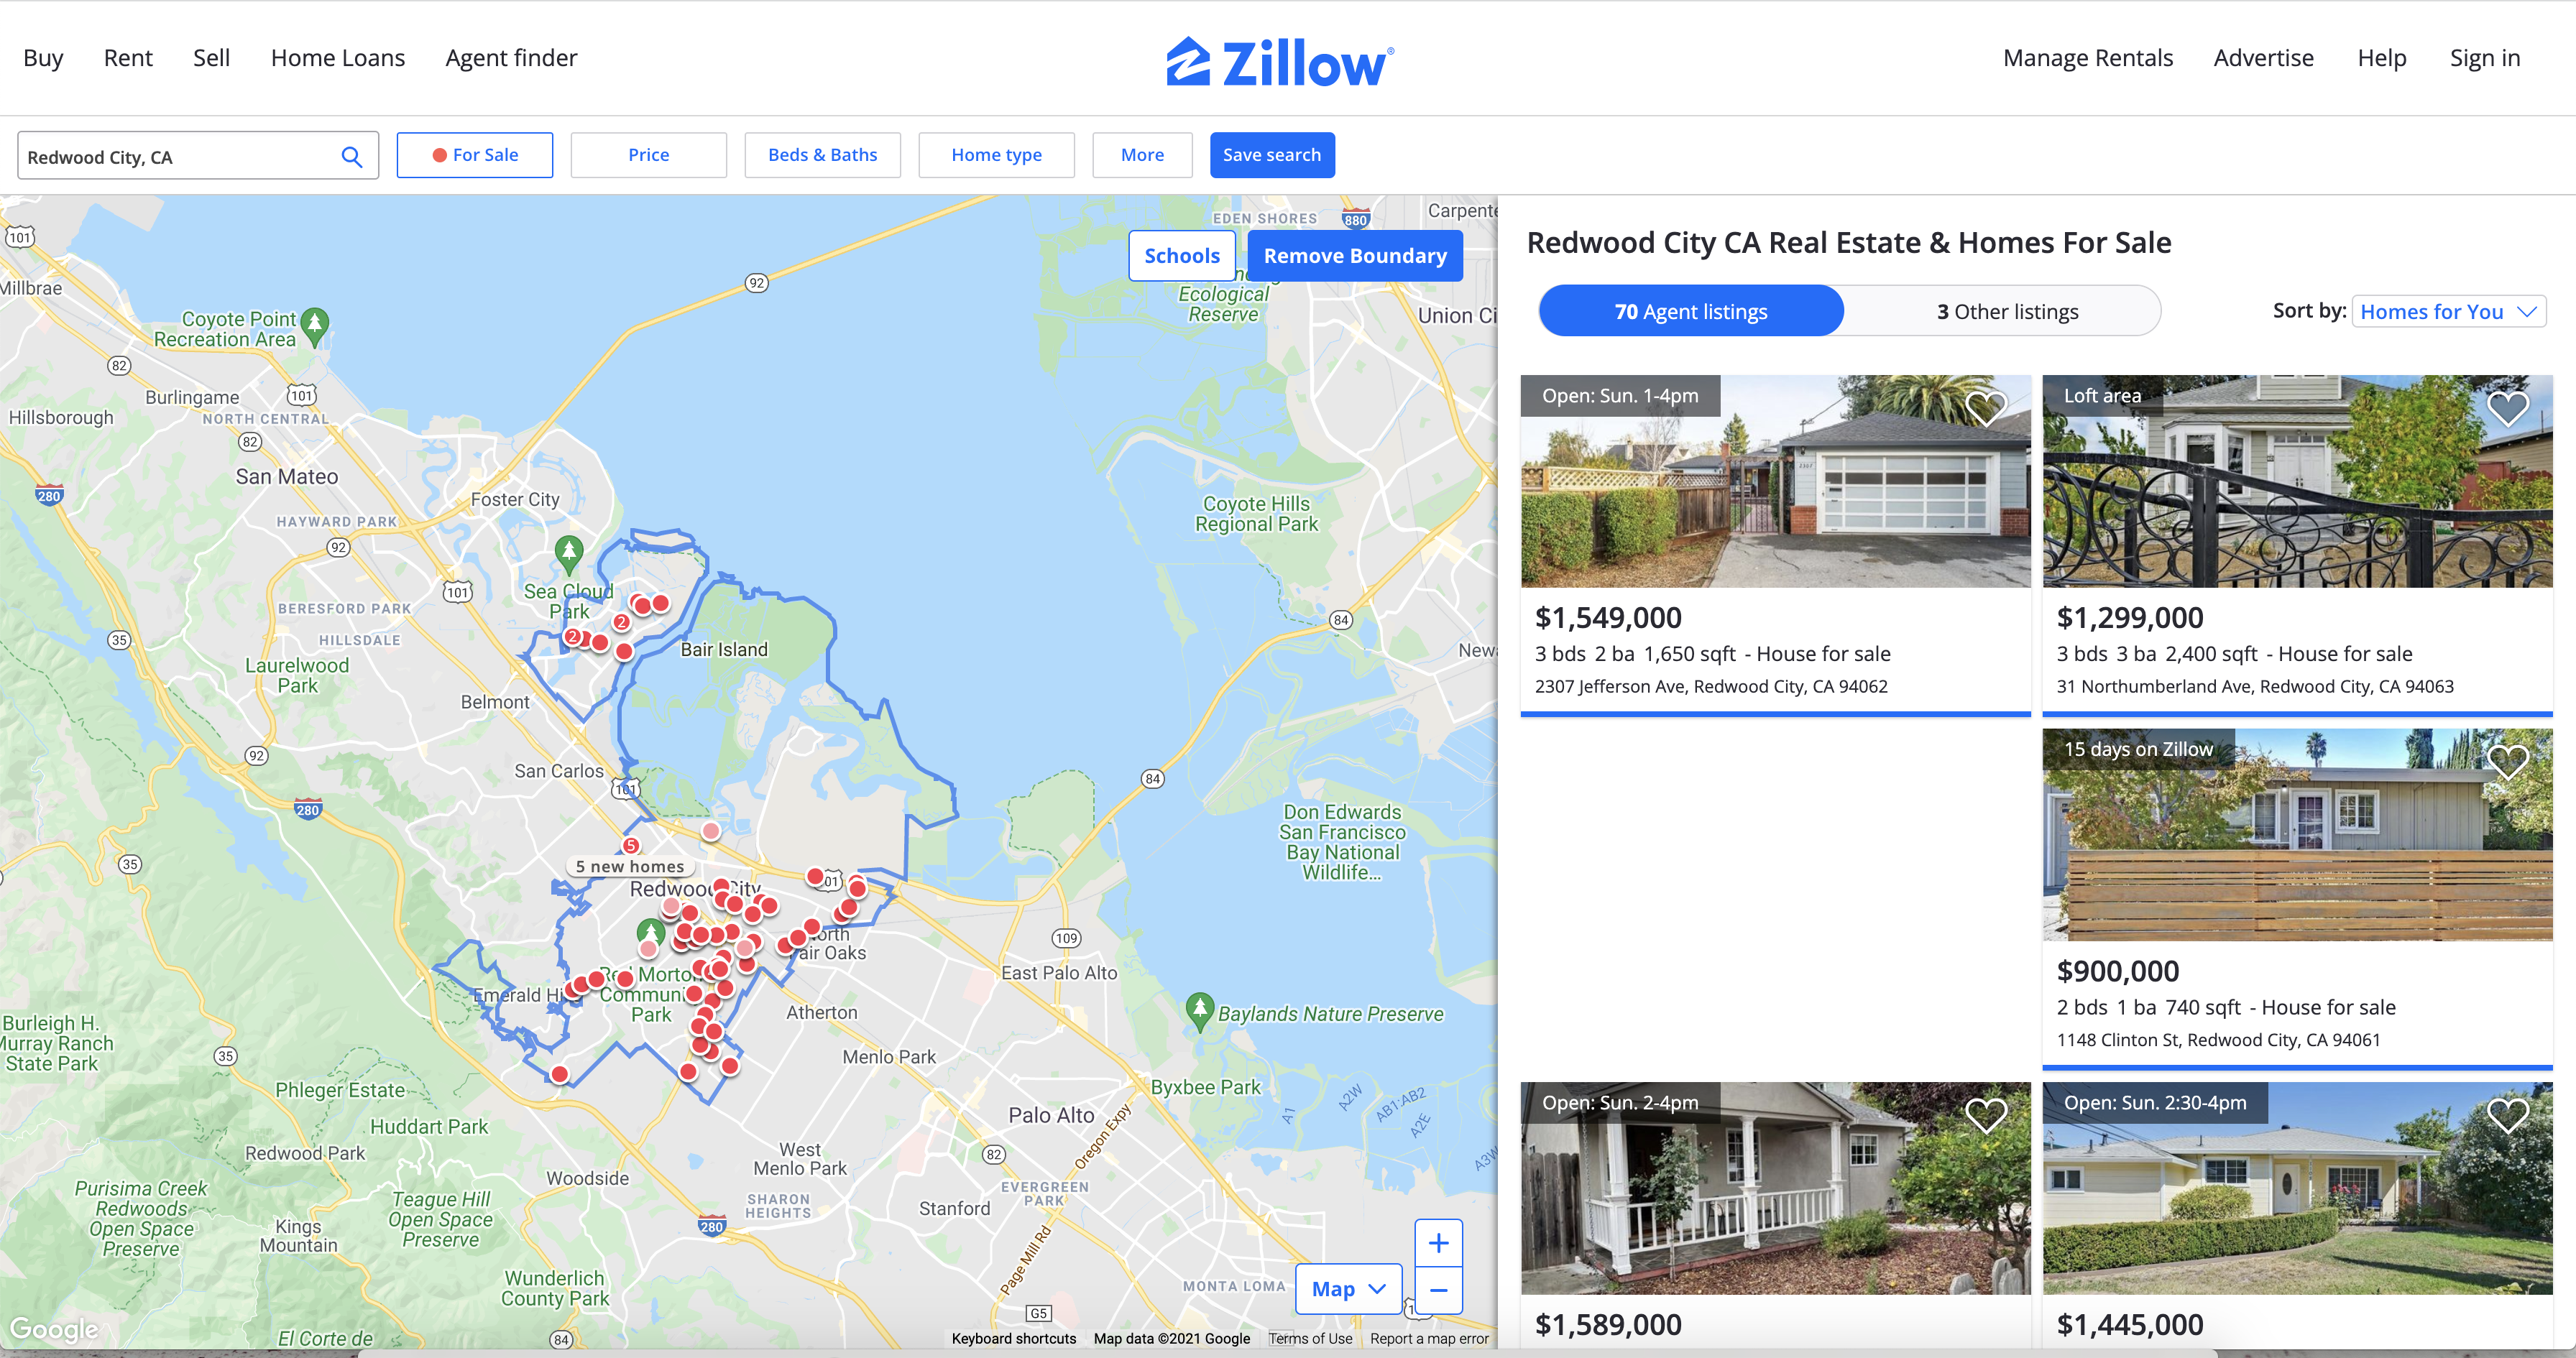 Zillow search results page